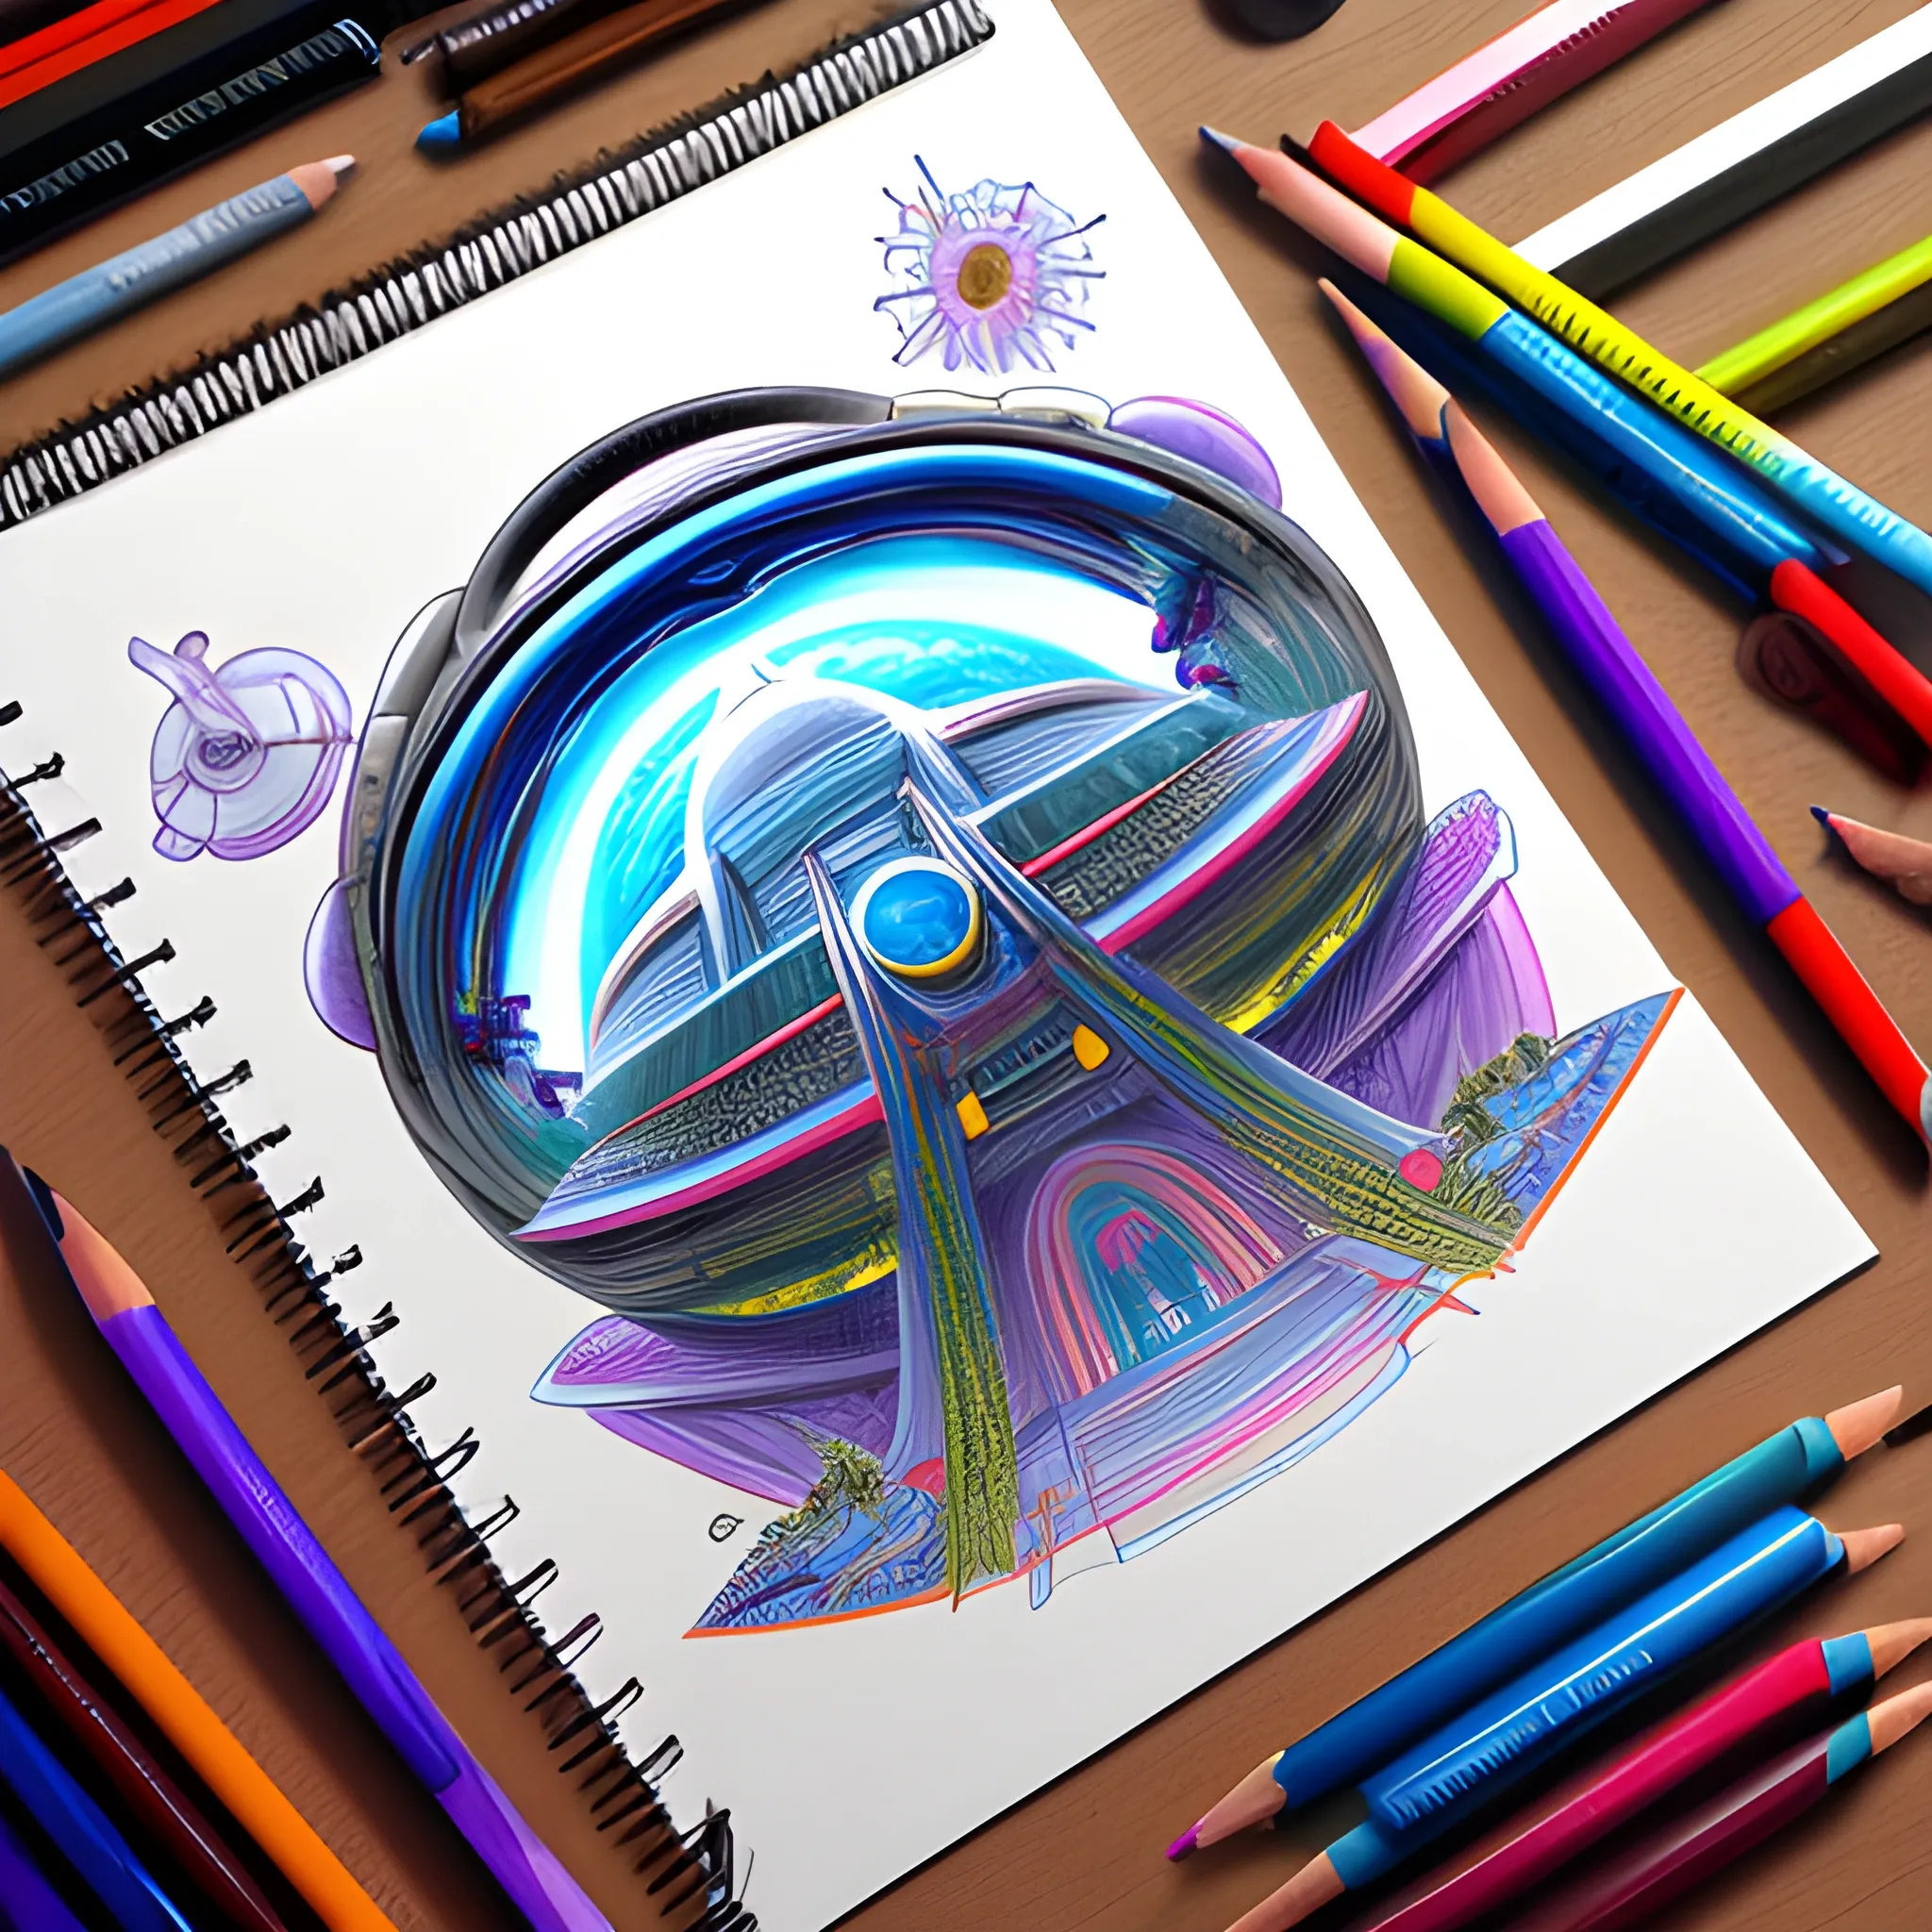 Future designs, planetary universes, super buildings and aliens, centered compositions and colorful., Pencil Sketch